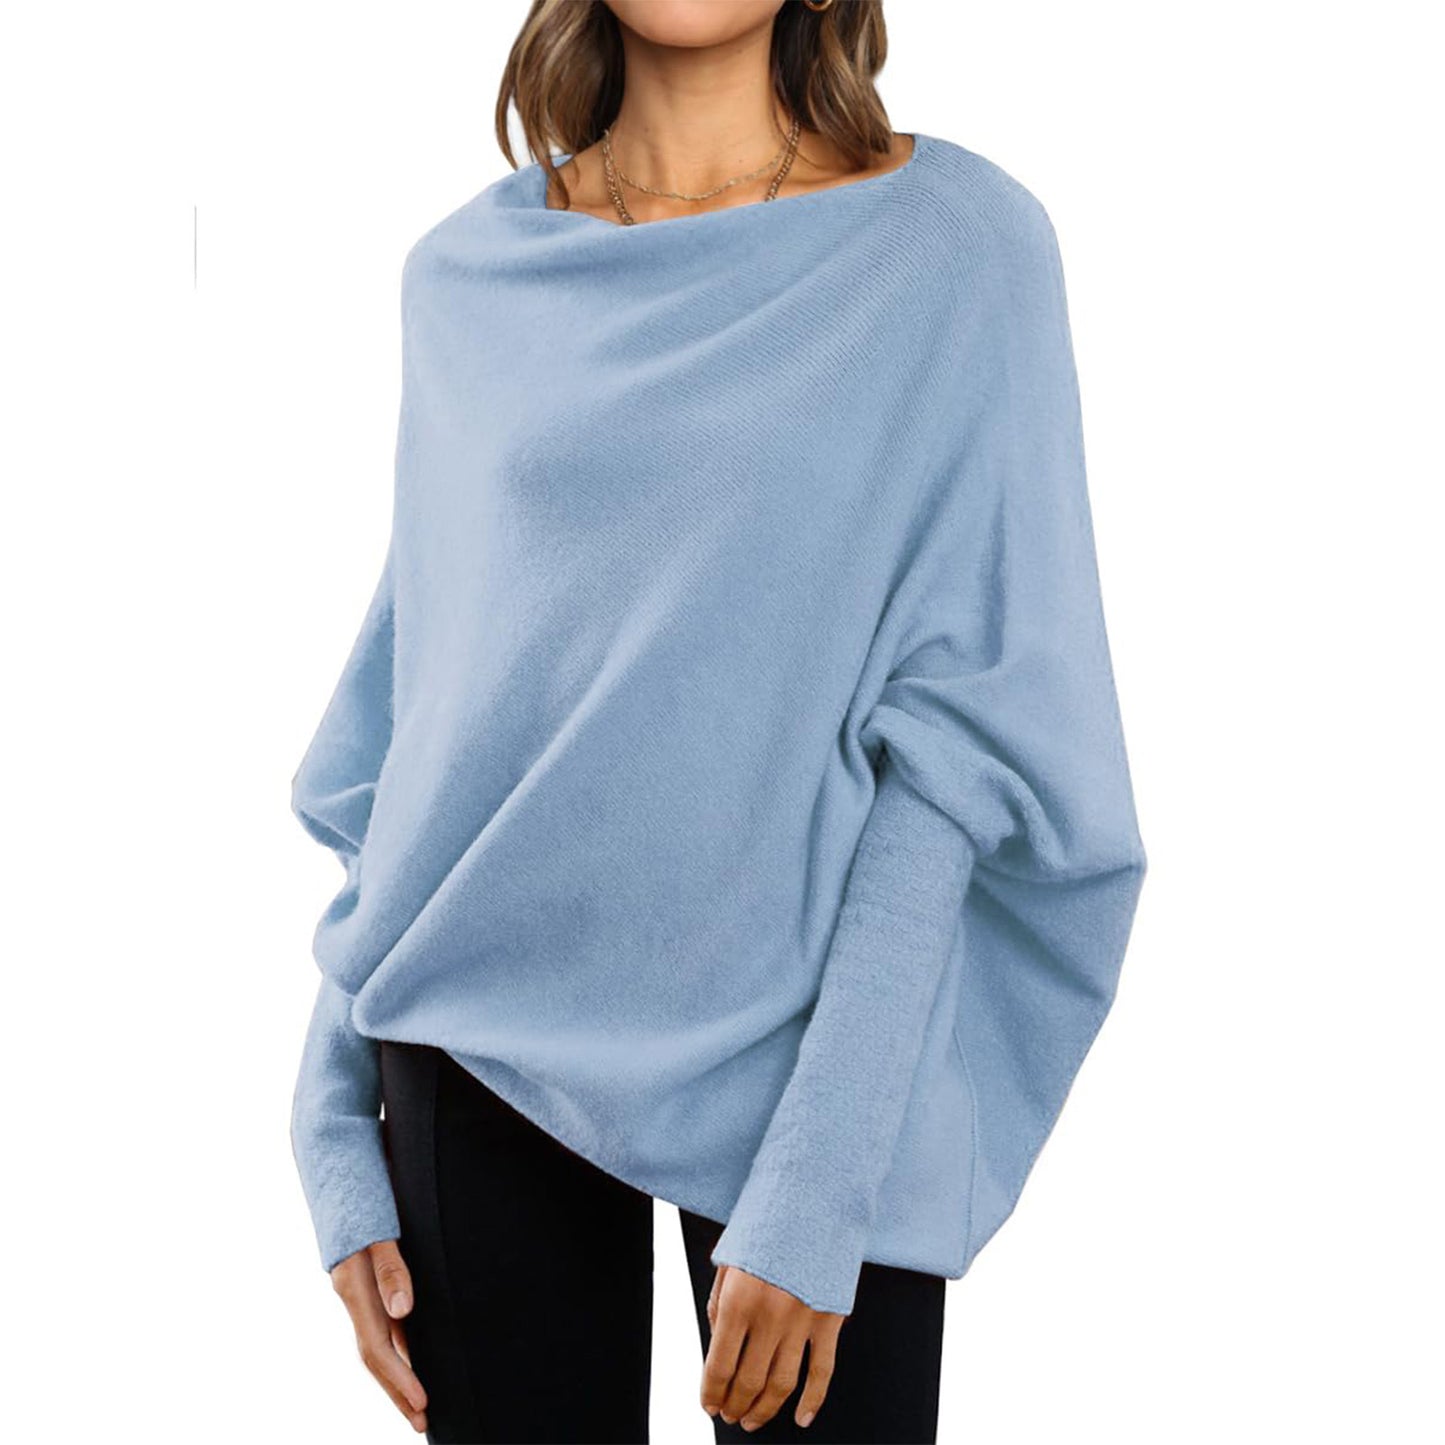 Loose Bat Sleeve Sweater Tops Simple Casual Fashion Versatile Solid Color Round Neck